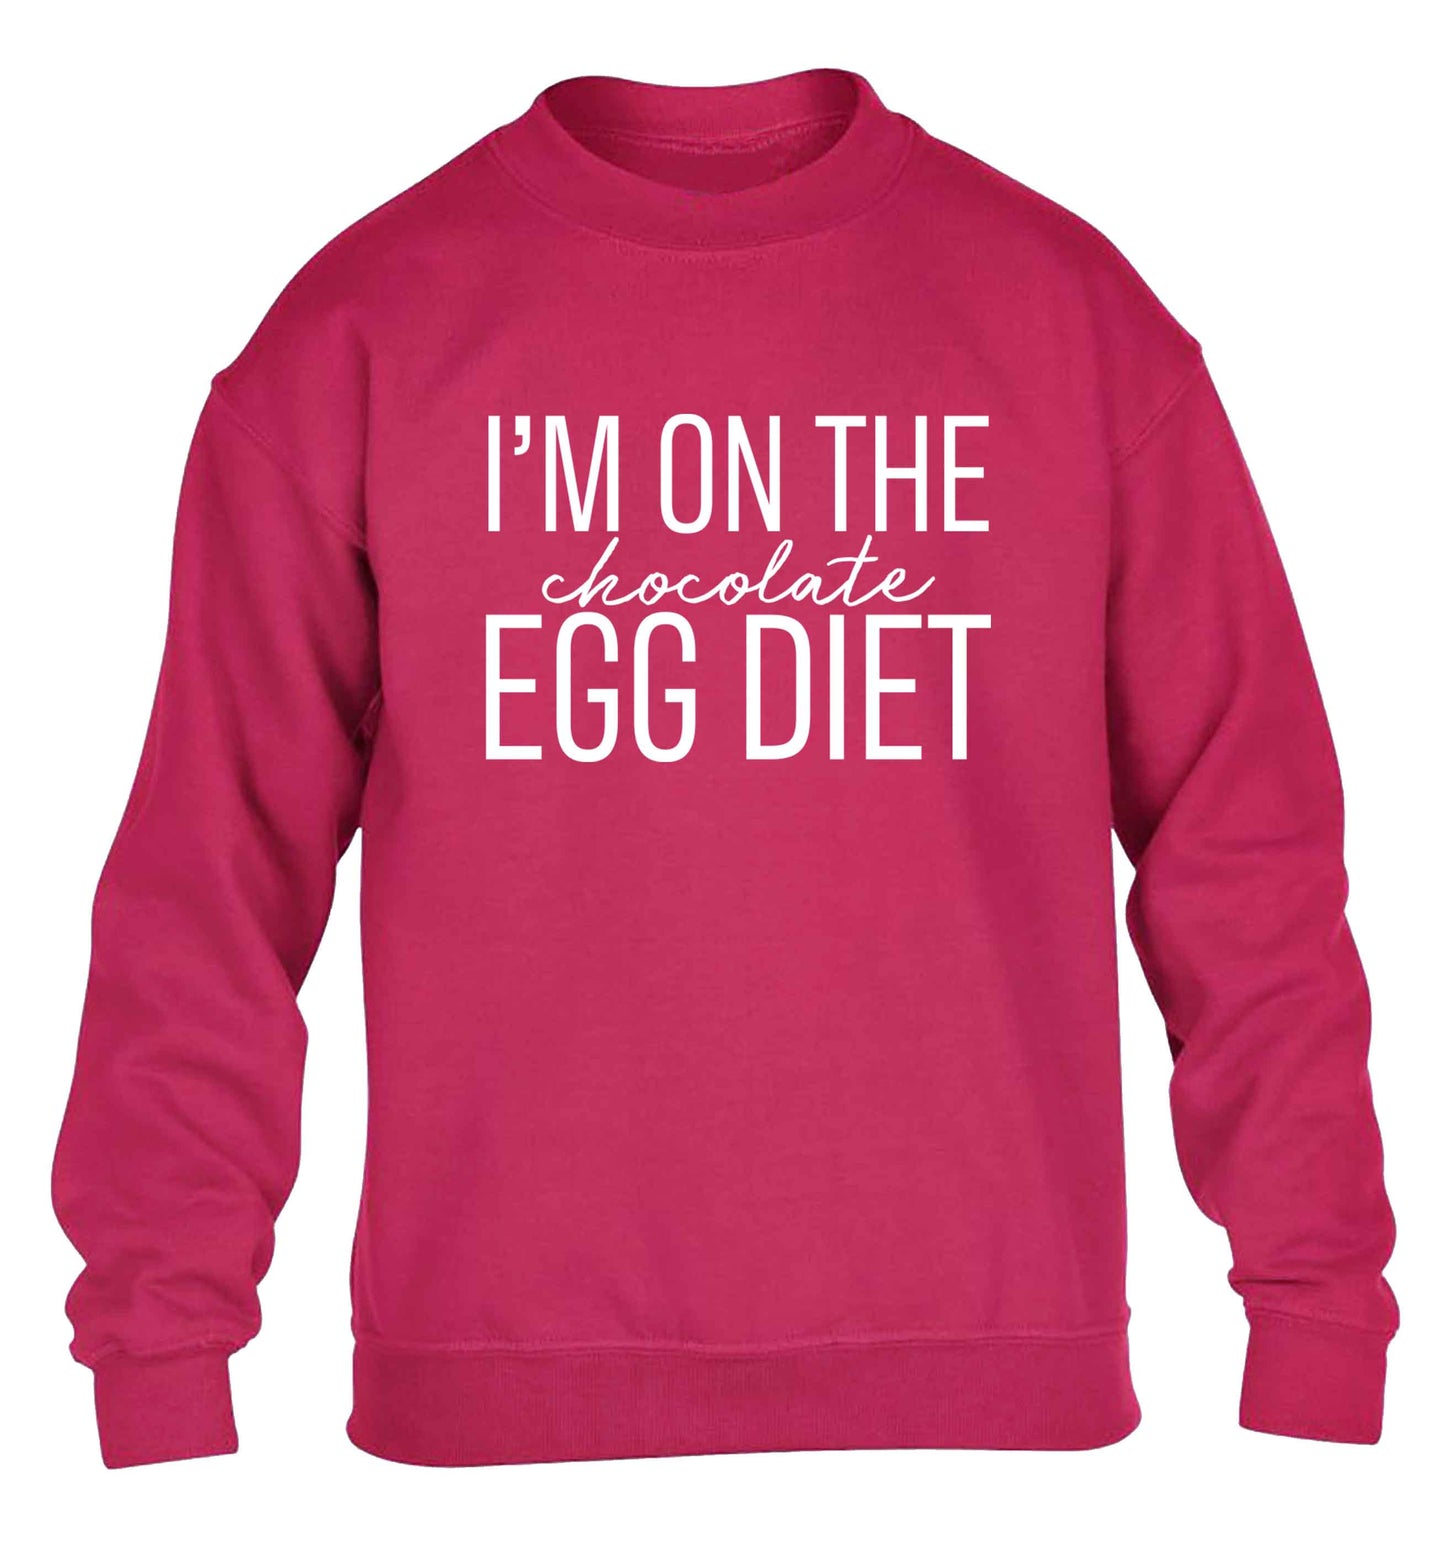 I'm on the chocolate egg diet children's pink sweater 12-13 Years